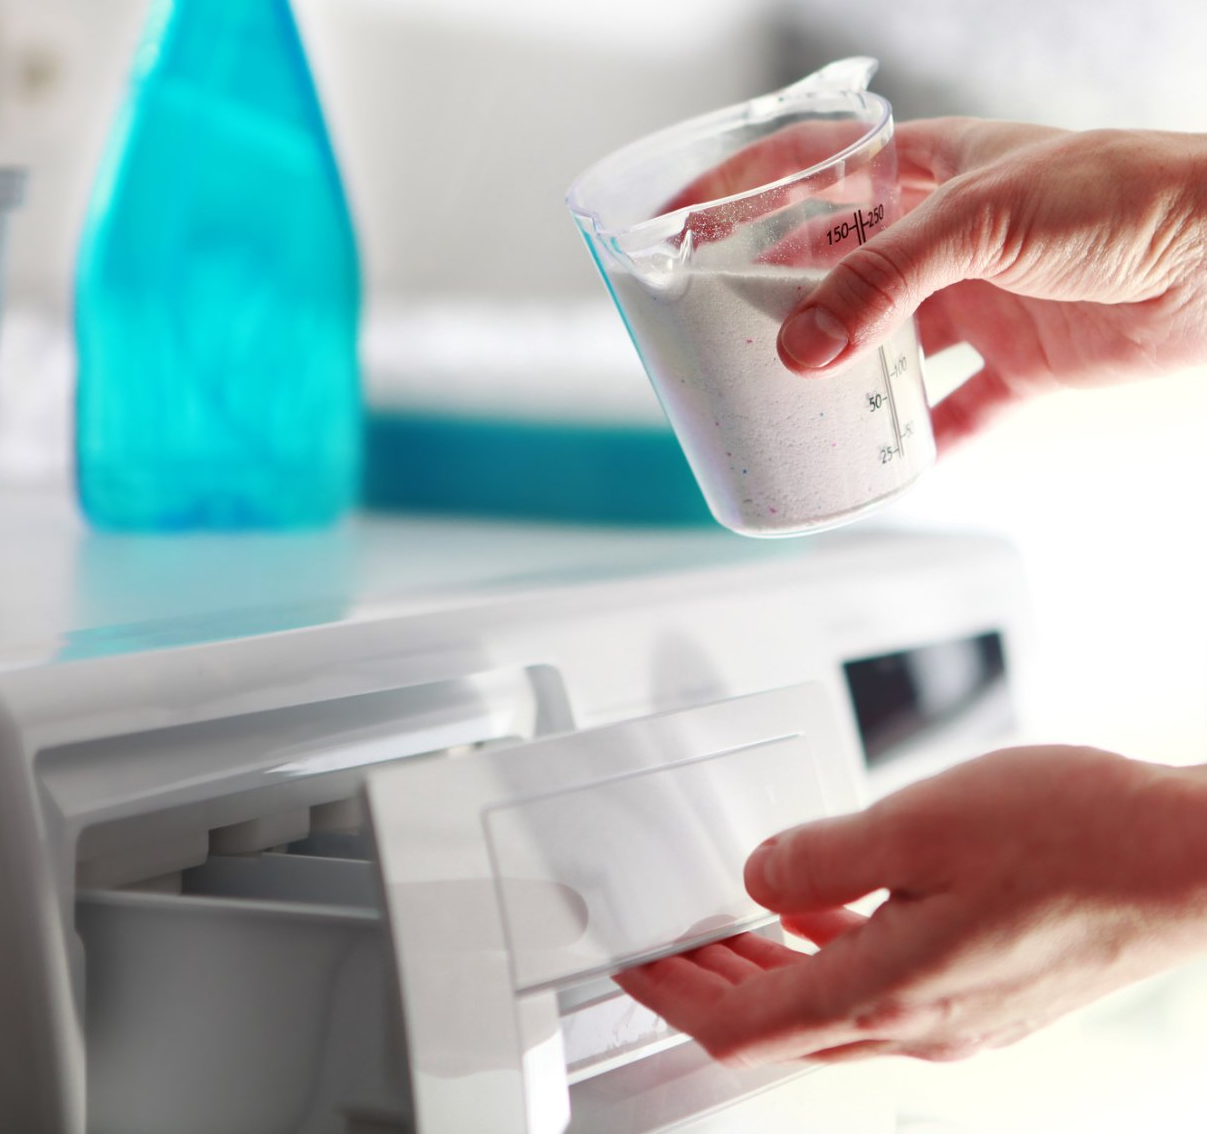 persons hands filling washing machine with laundry soap